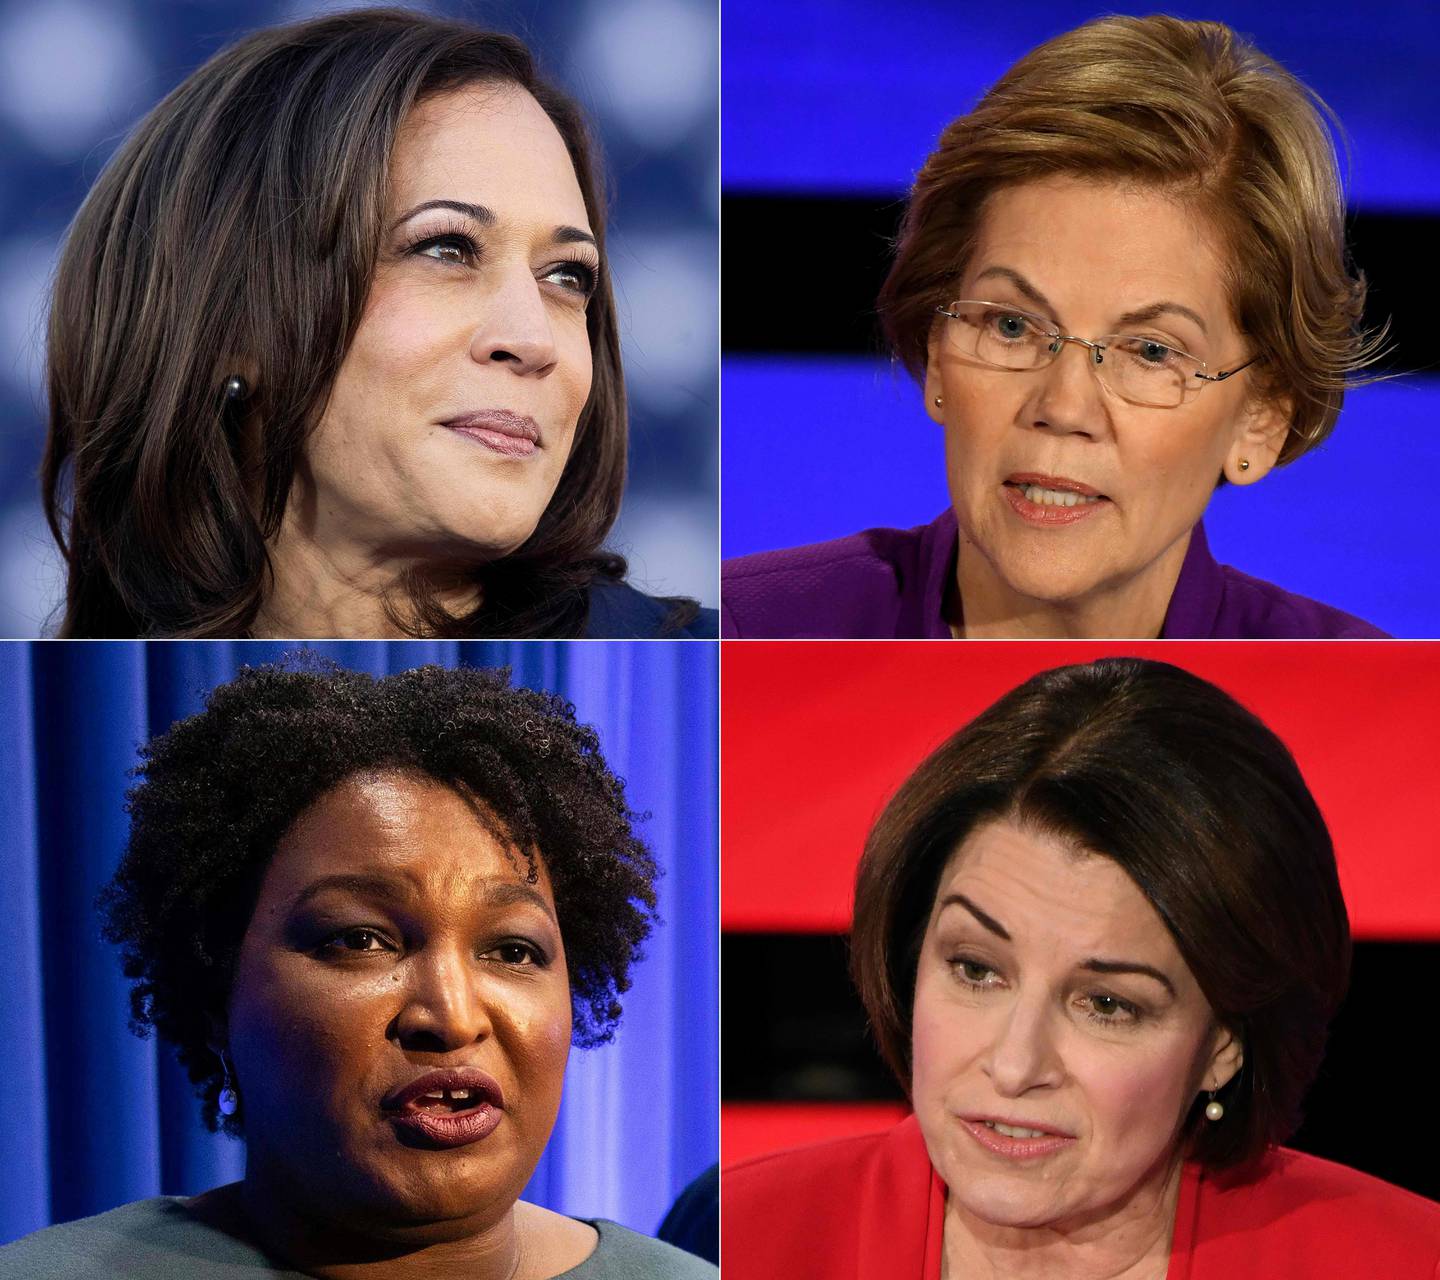 (COMBO) This combination of pictures created on April 09, 2020 shows (L-R, top to bottom) US Senator Kamala Harris  on January 27, 2019 in Oakland, California; US Senator Elizabeth Warren on January 14, 2020, in Des Moines, Iowa; former Georgia Democratic gubernatorial candidate Stacey Abrams on November 20, 2019, in Atlanta, Georgia and US Senator Amy Klobuchar on January 14, 2020, in Des Moines, Iowa. - White House hopeful, former US Vice President Joe Biden has committed to picking a woman as his vice presidential candidate should he win the Democratic nomination. Harris, Warren, Abrams and Klobuchar are the top candidates. (Photos by AFP)